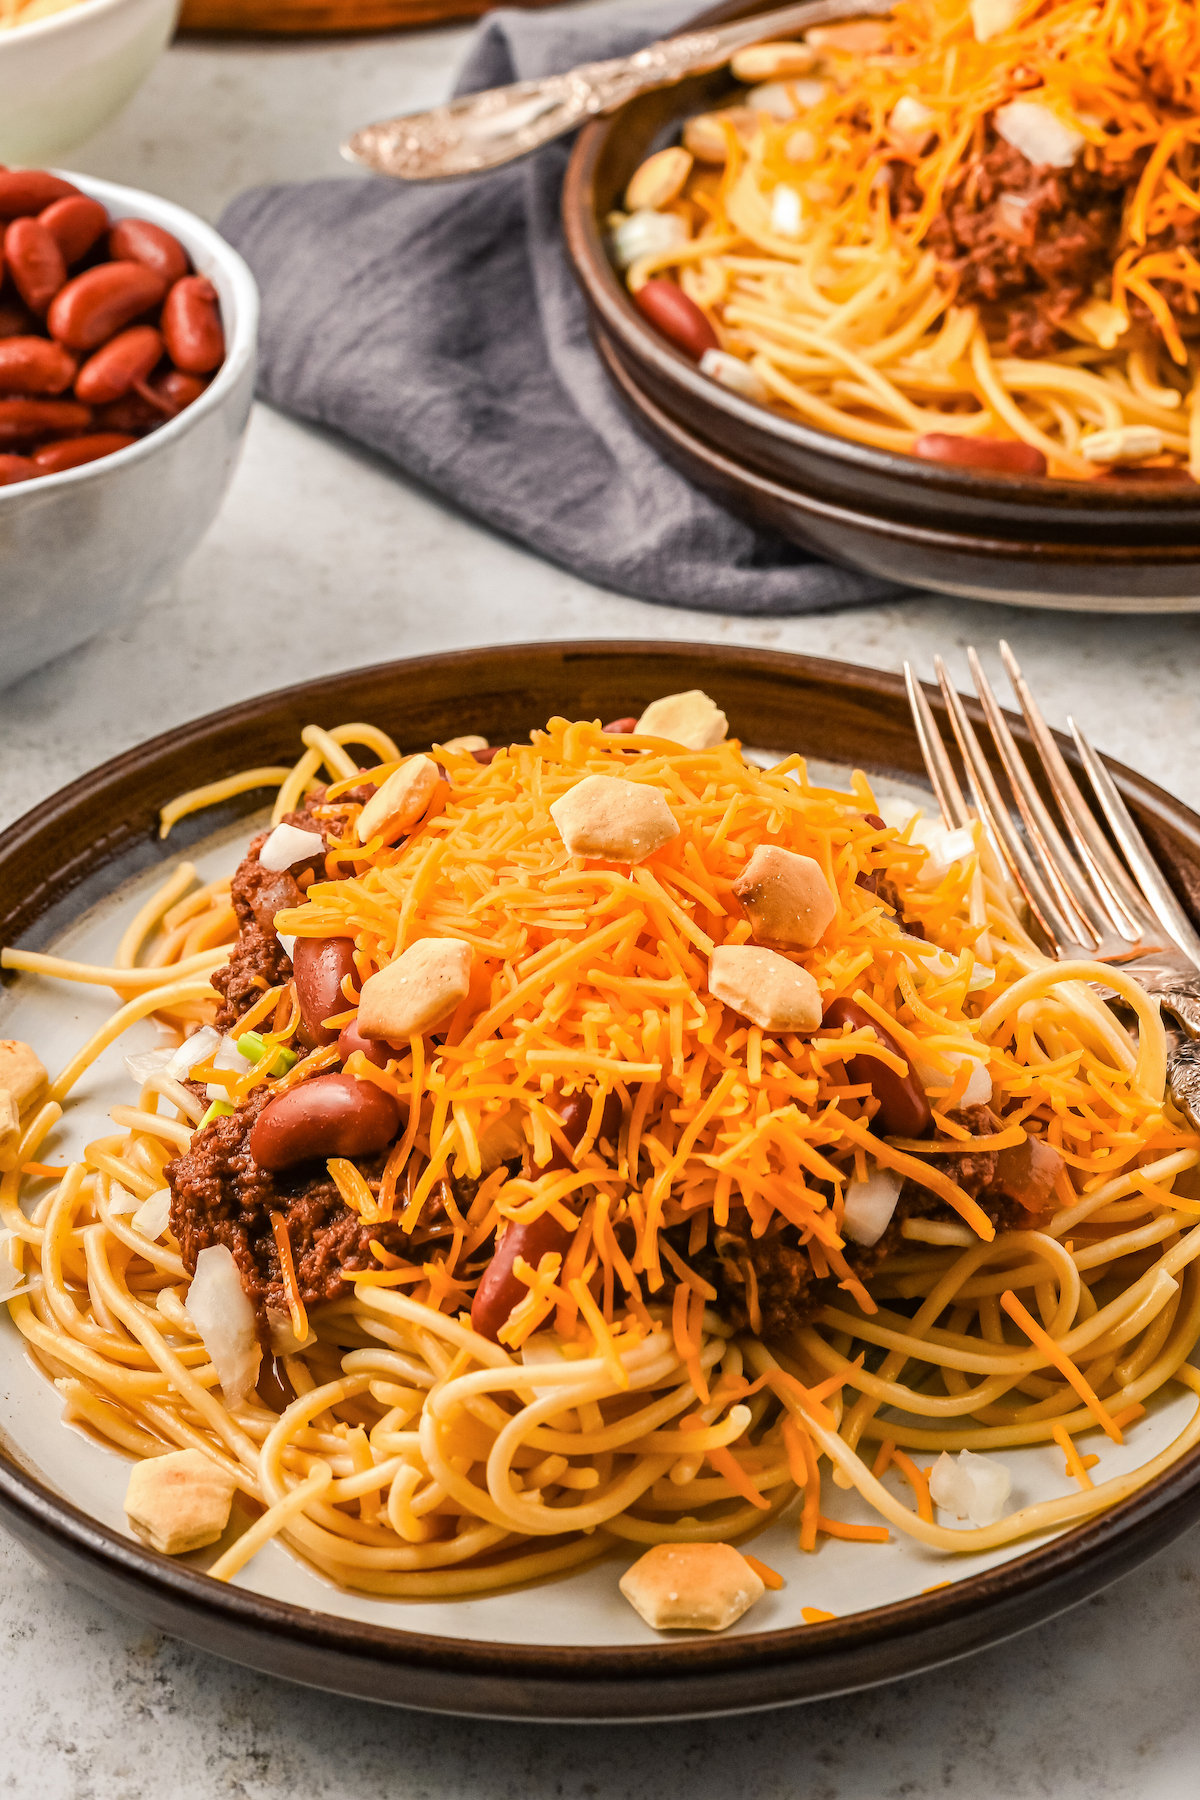 Chili and pasta on dinner plates, with shredded cheddar and other toppings.